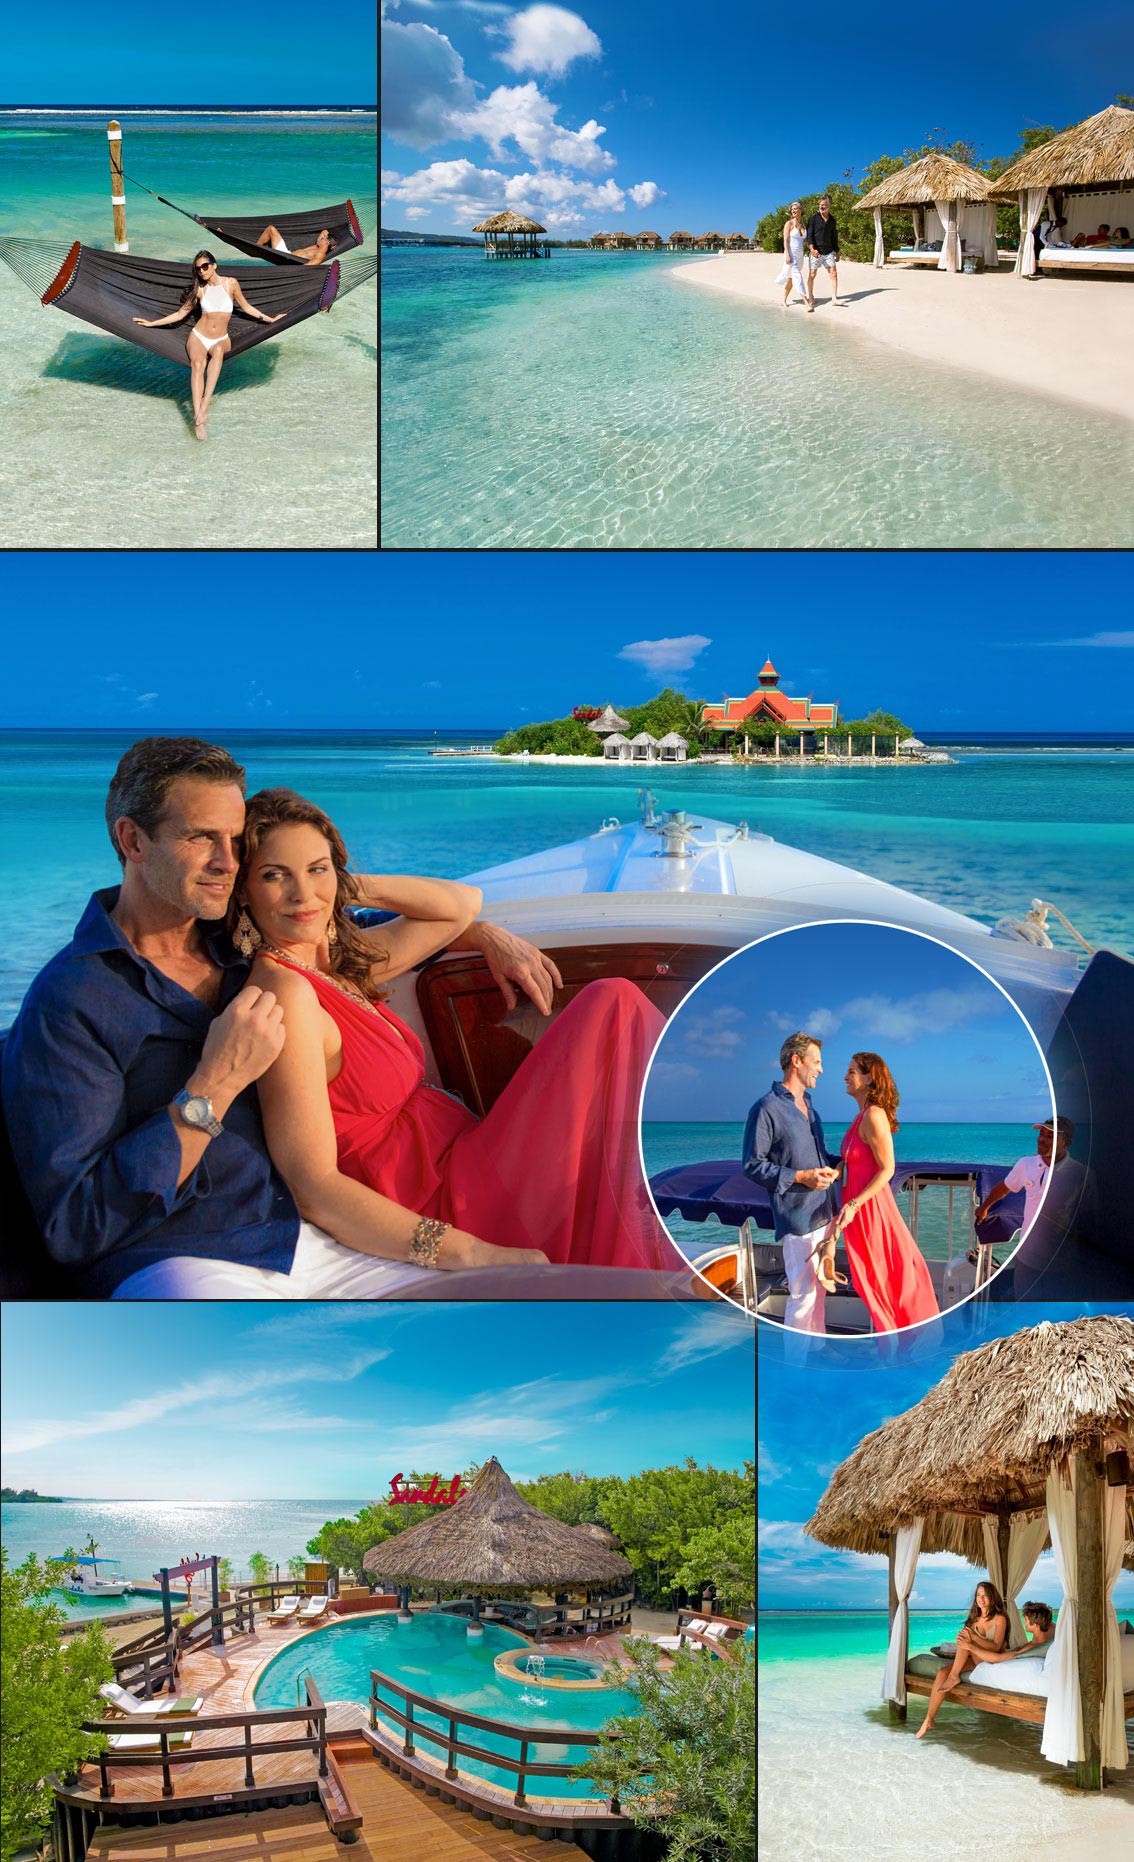 Private Offshore Island at Sandals Royal Caribbean Sandals image